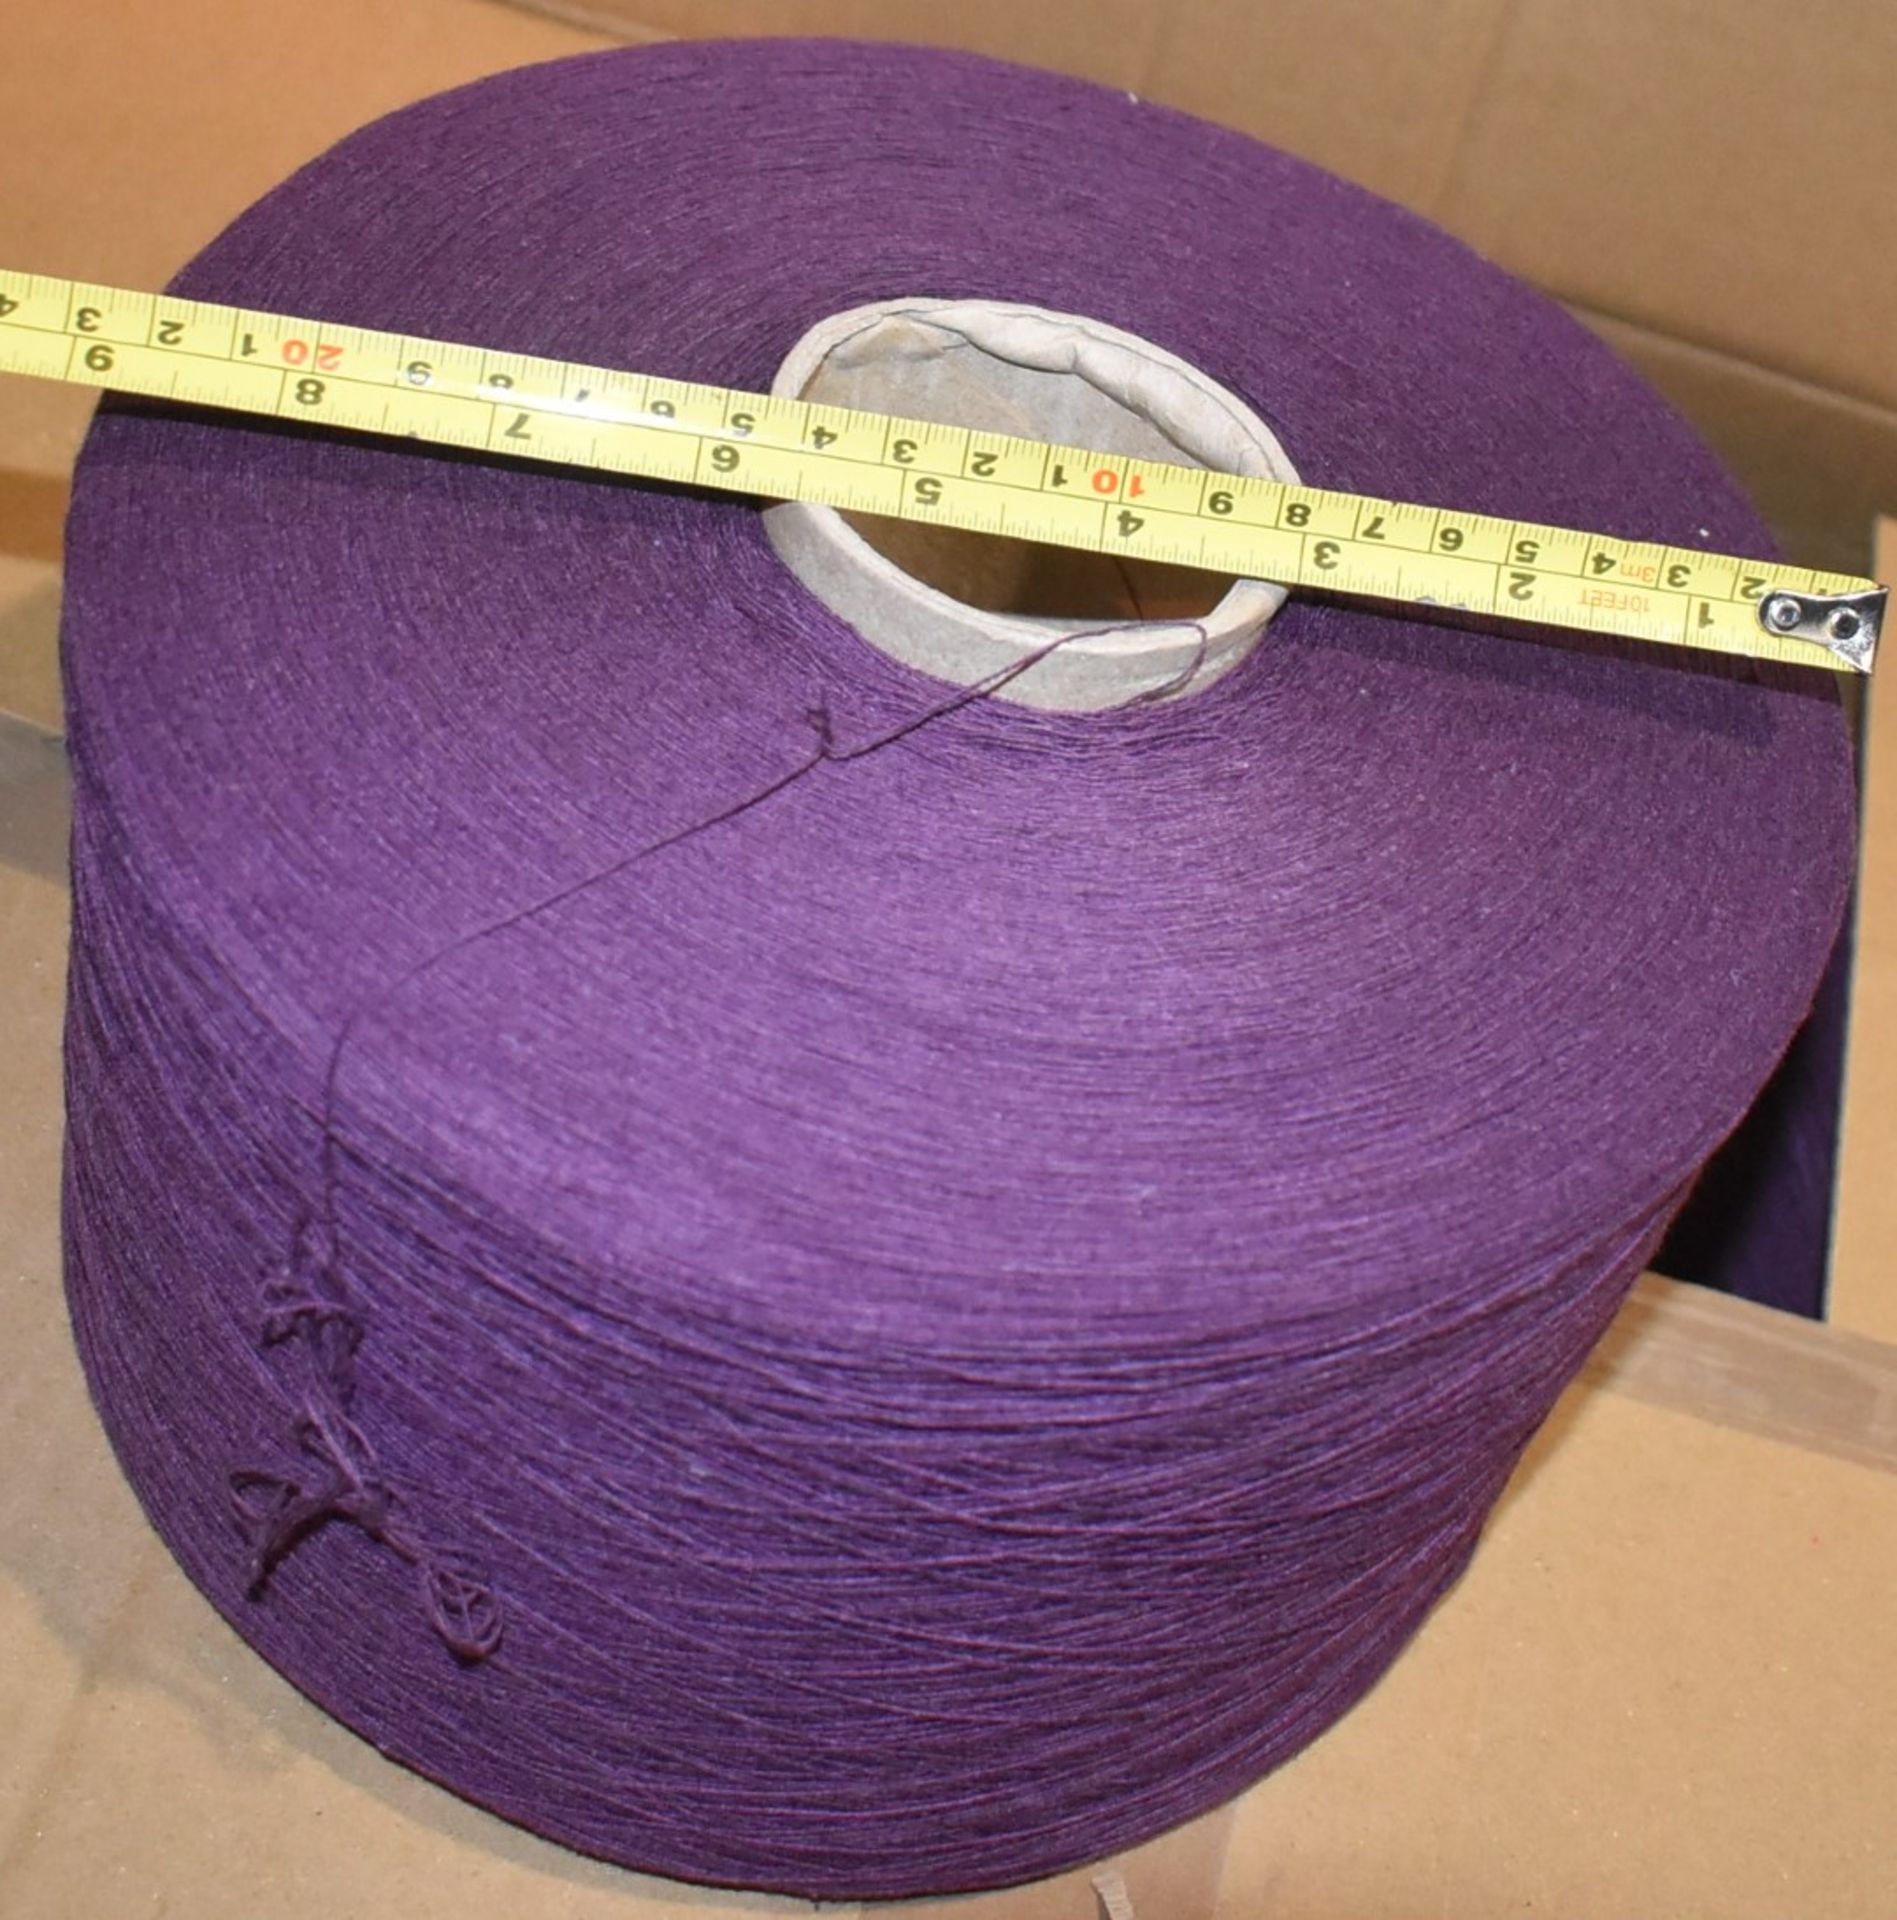 1 x Cone of 1/13 MicroCotton Knitting Yarn - Purple - Approx Weight: 2,300g - New Stock ABL Yarn - Image 7 of 10